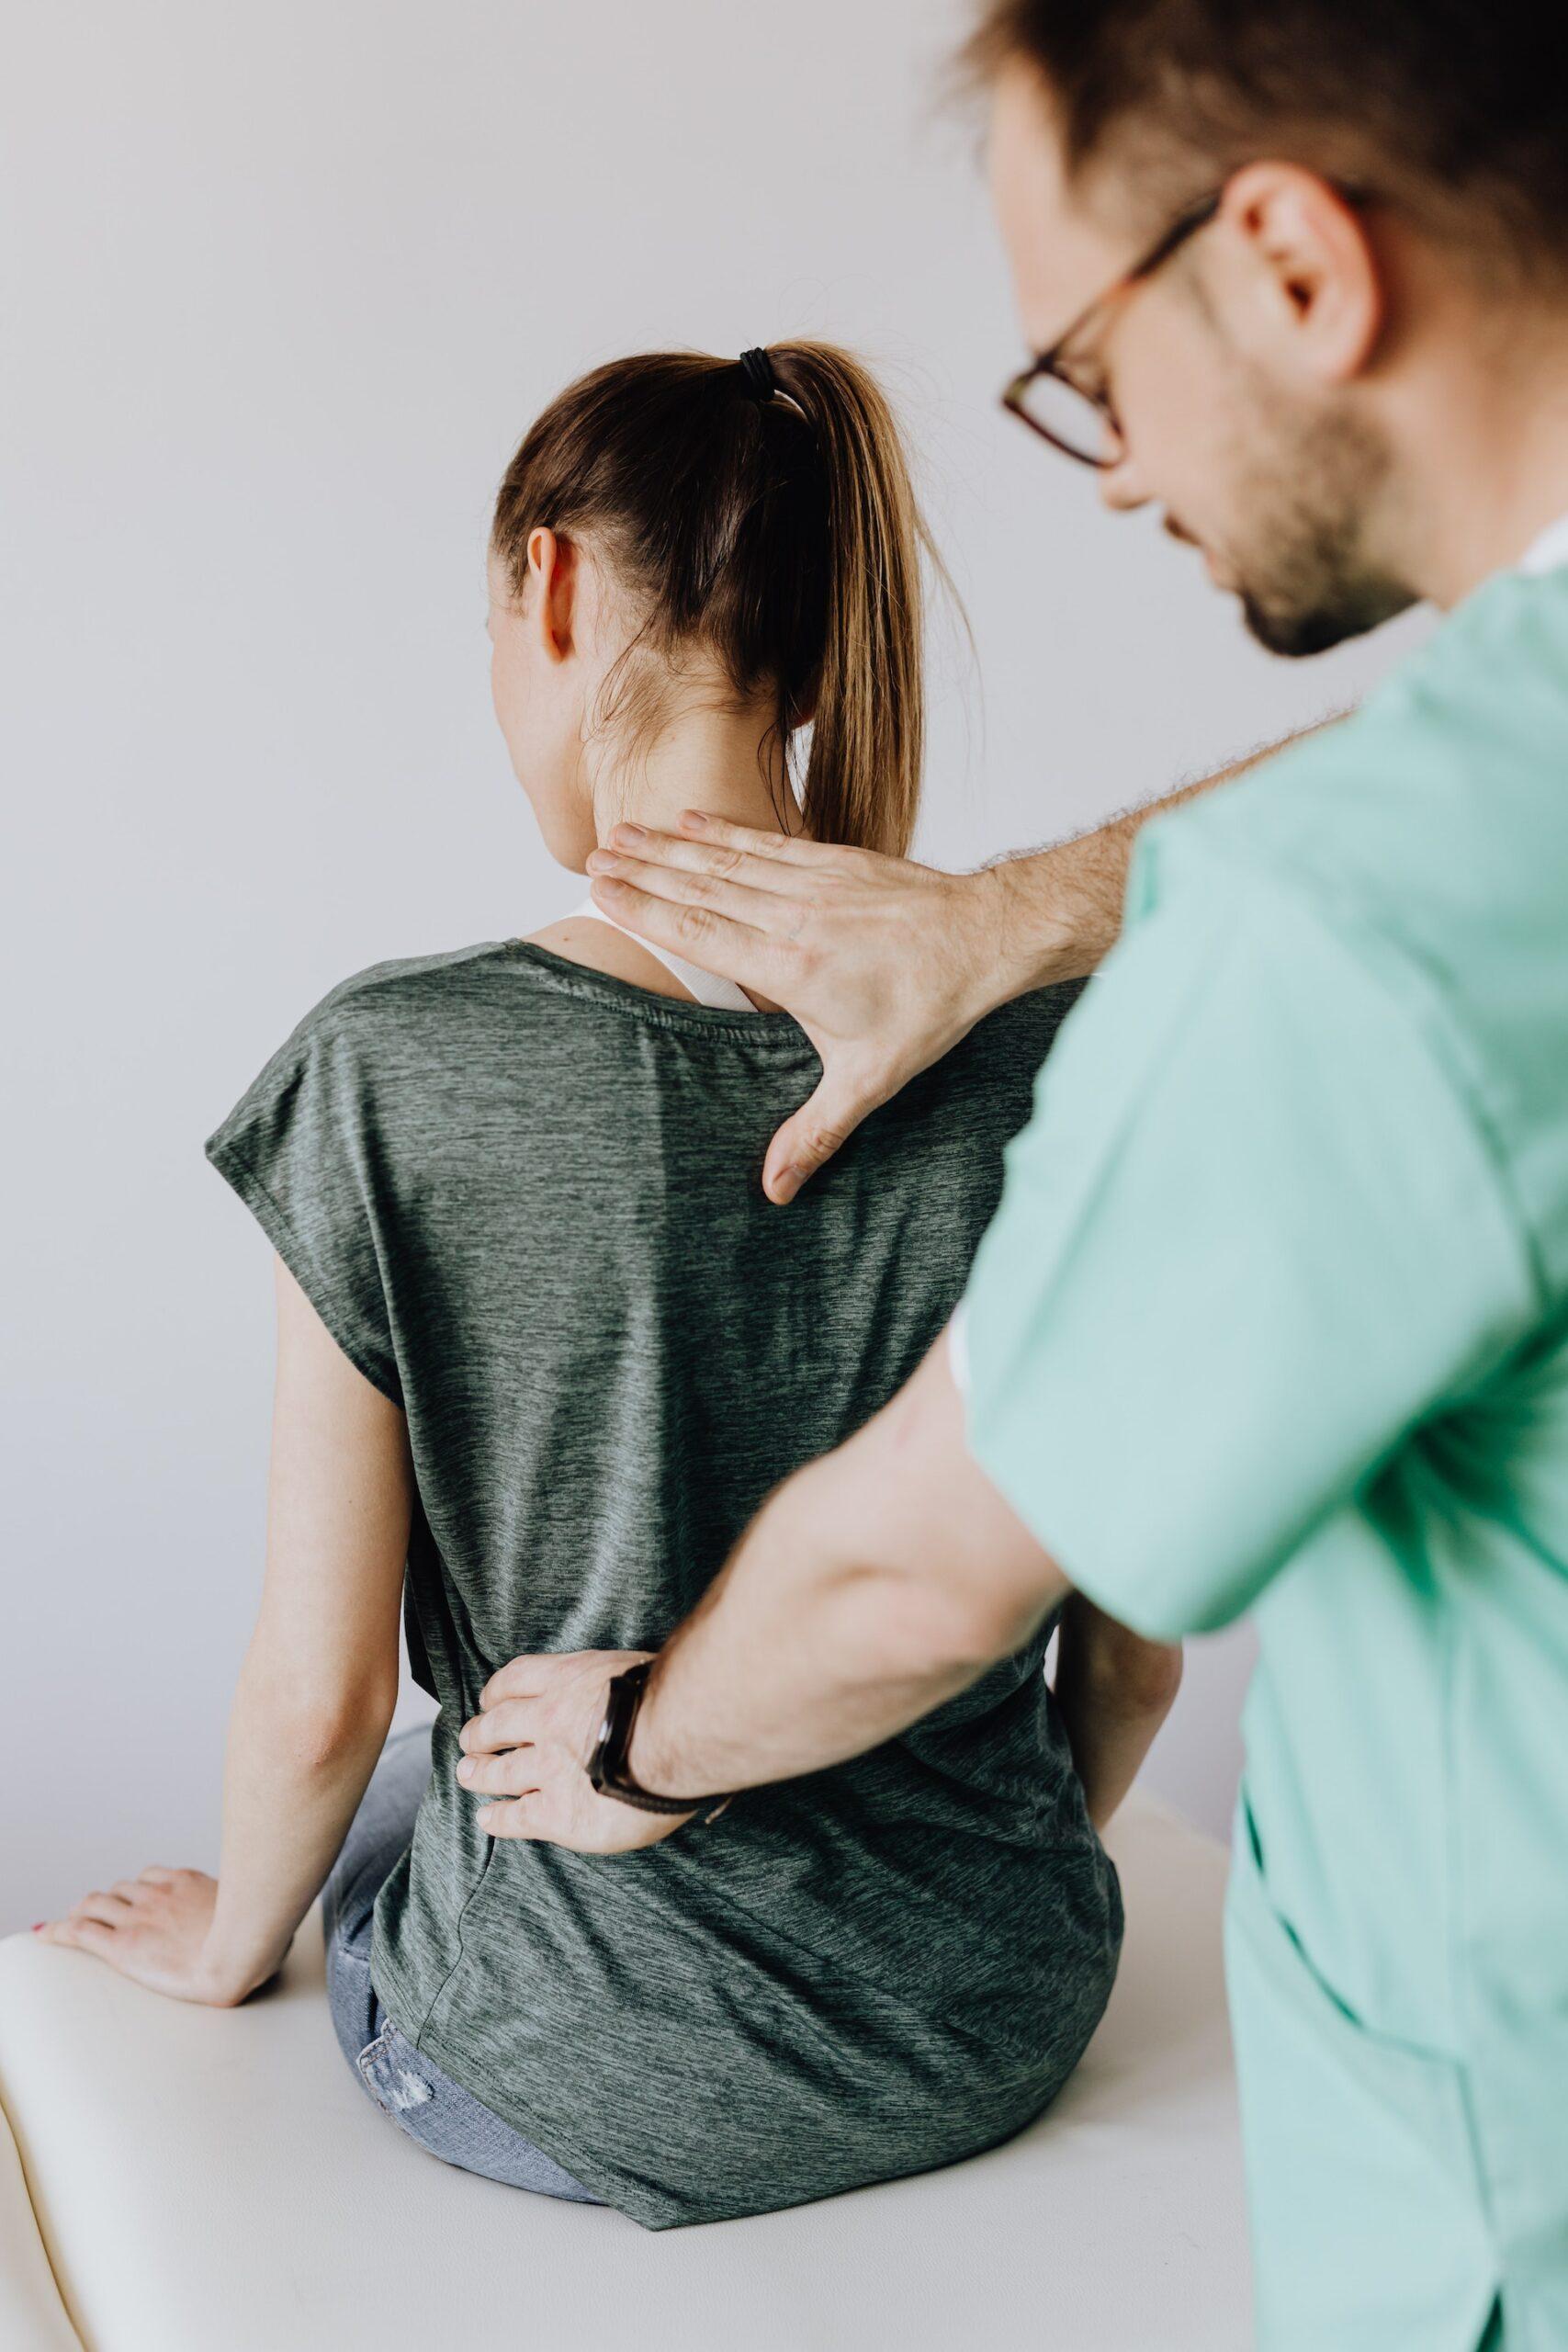 Chiropractor performing a back examination on the patient